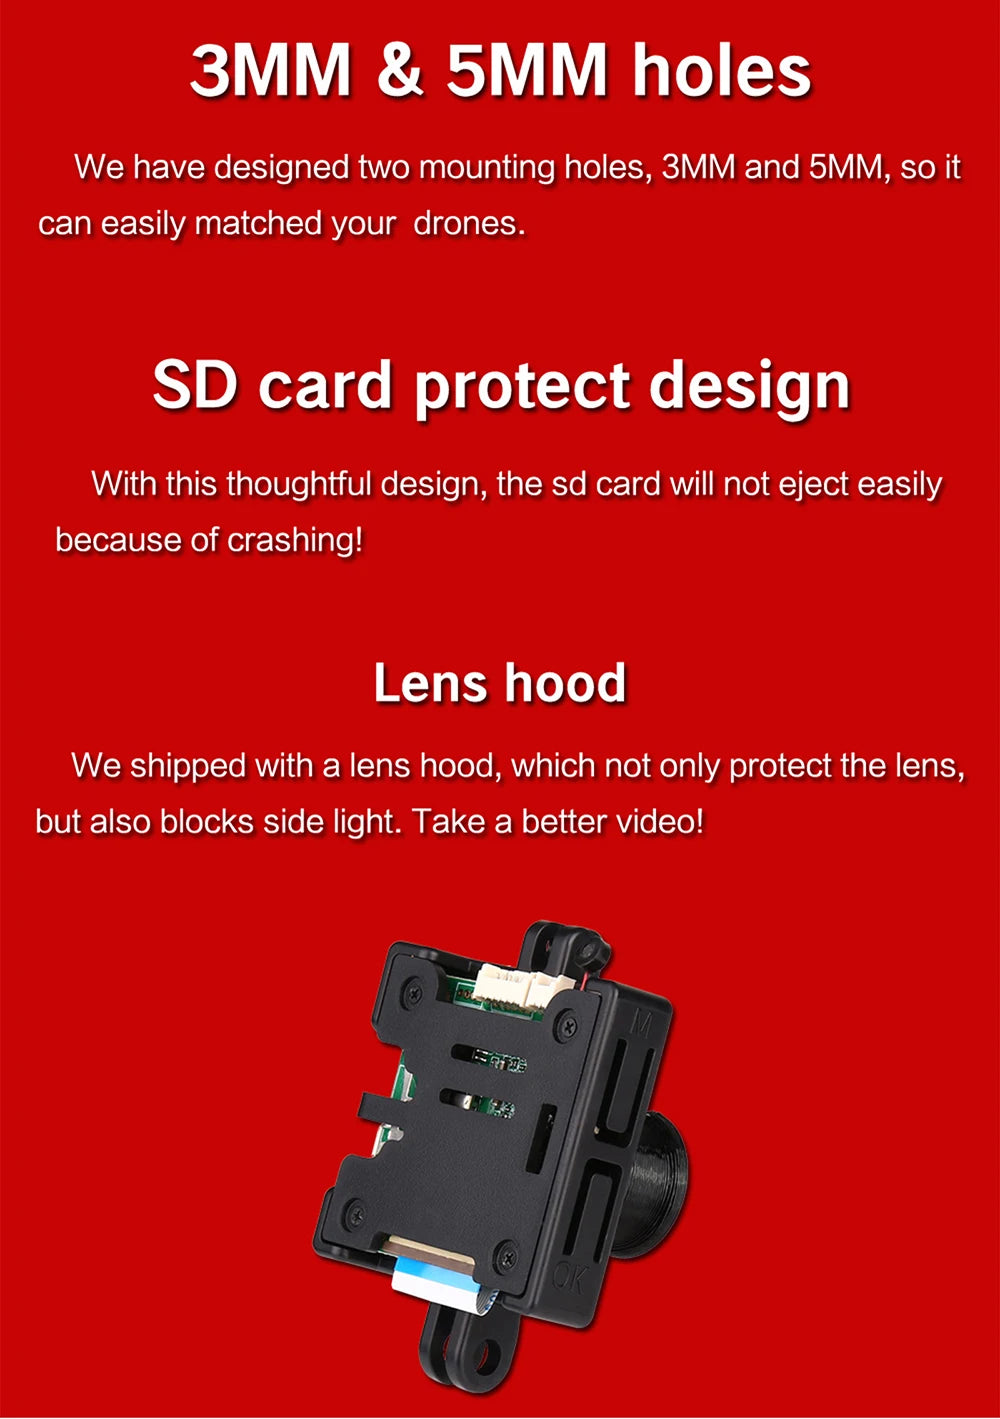 SD card protect design with thoughtful design, sd card won't eject easily